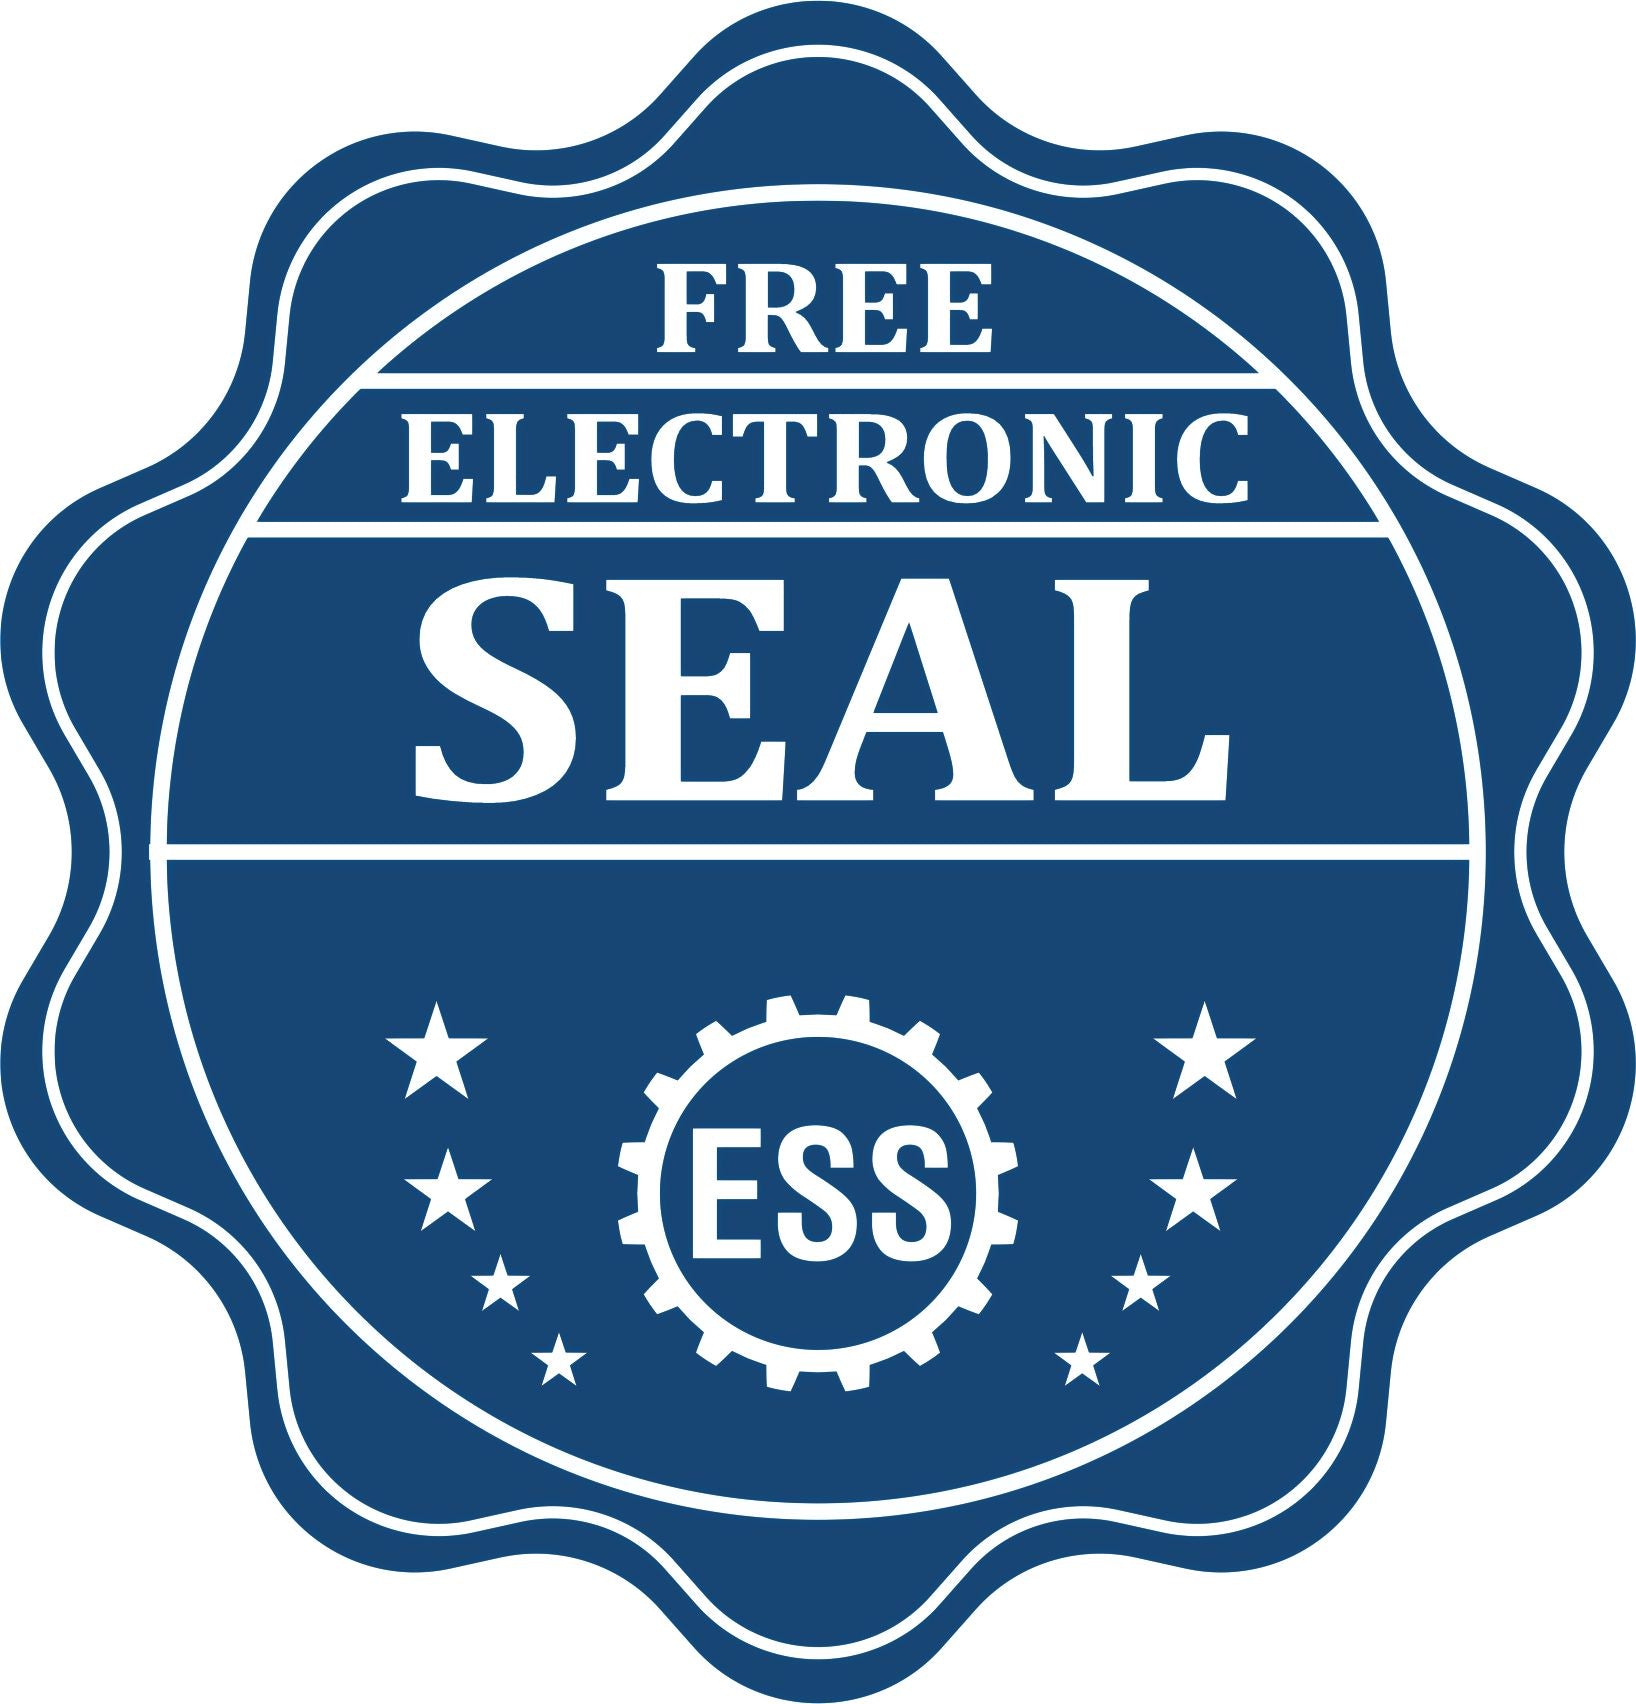 A badge showing a free electronic seal for the Gift Colorado Engineer Seal with stars and the ESS gear on the emblem.